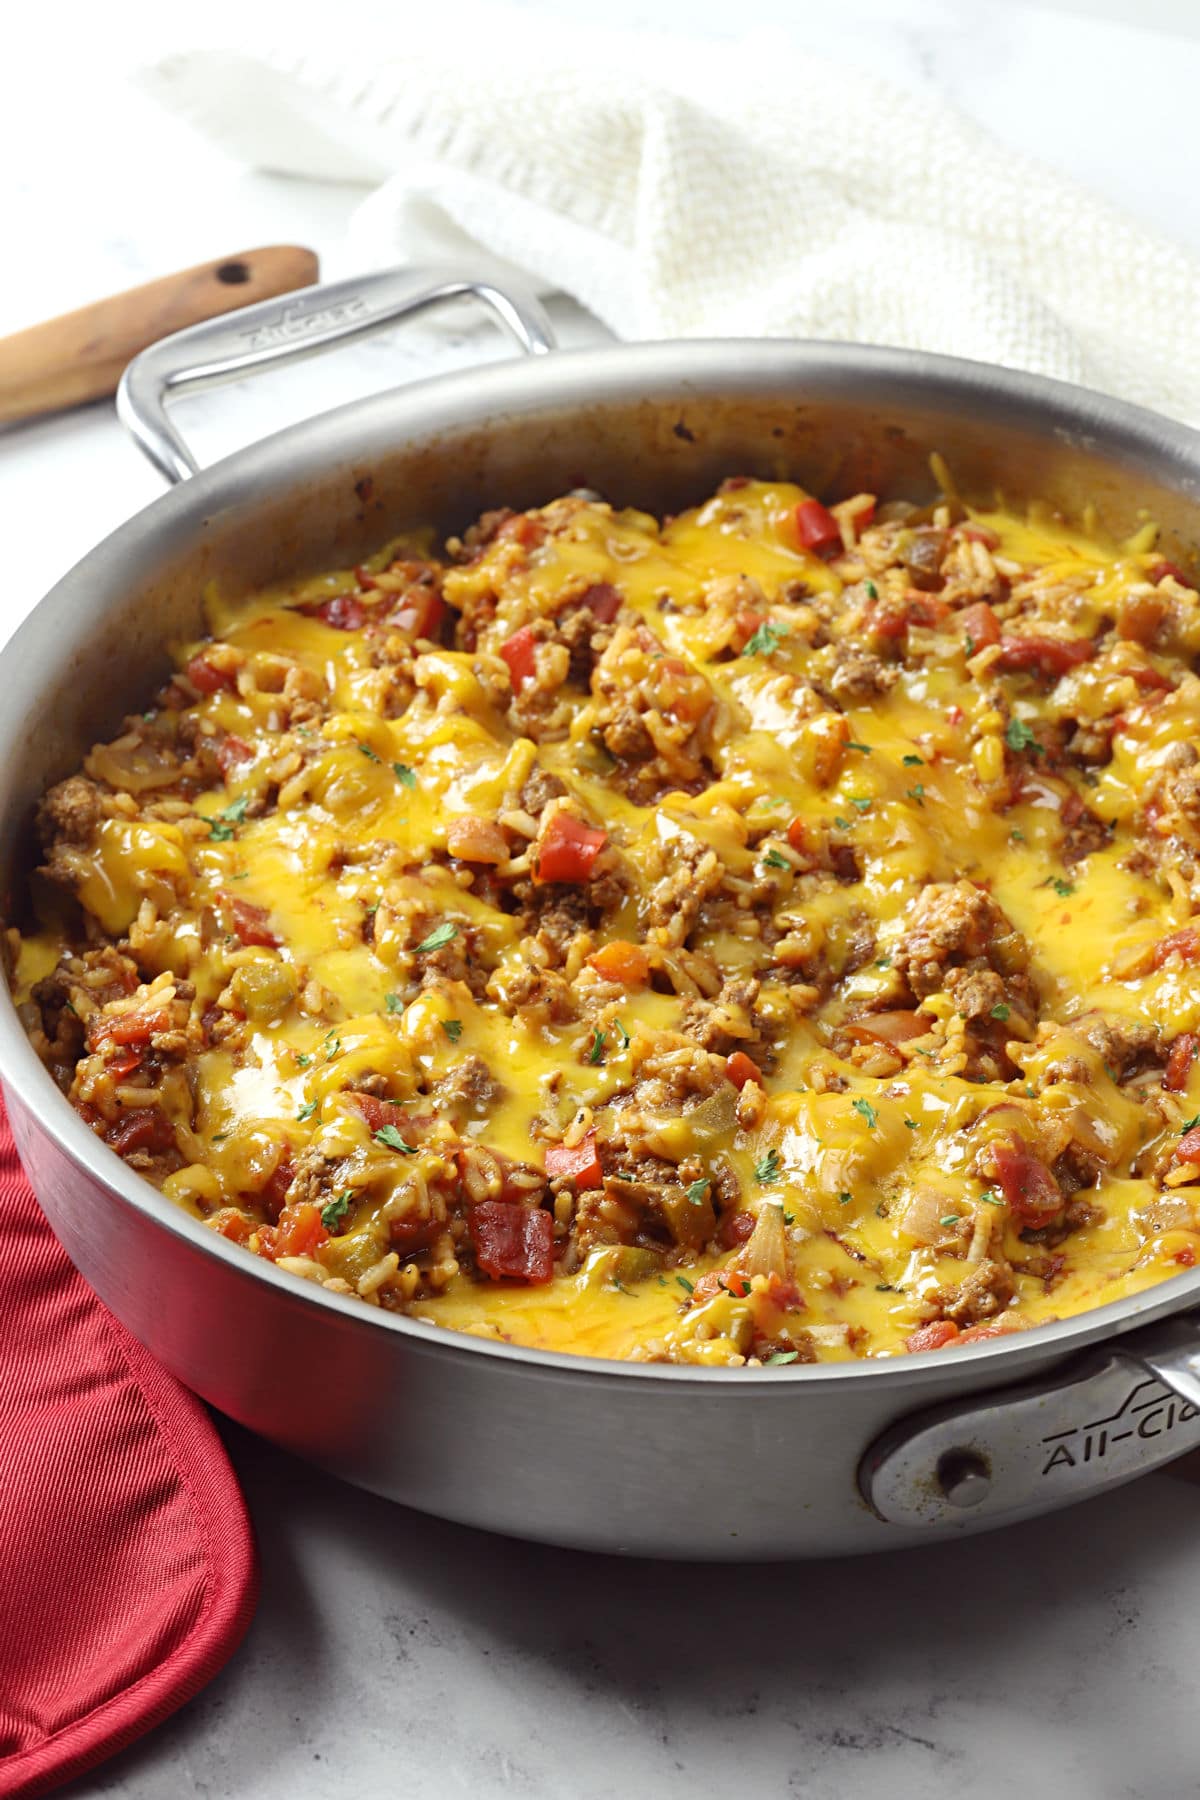 Saute pan filled with beef, rice, and melted cheese.